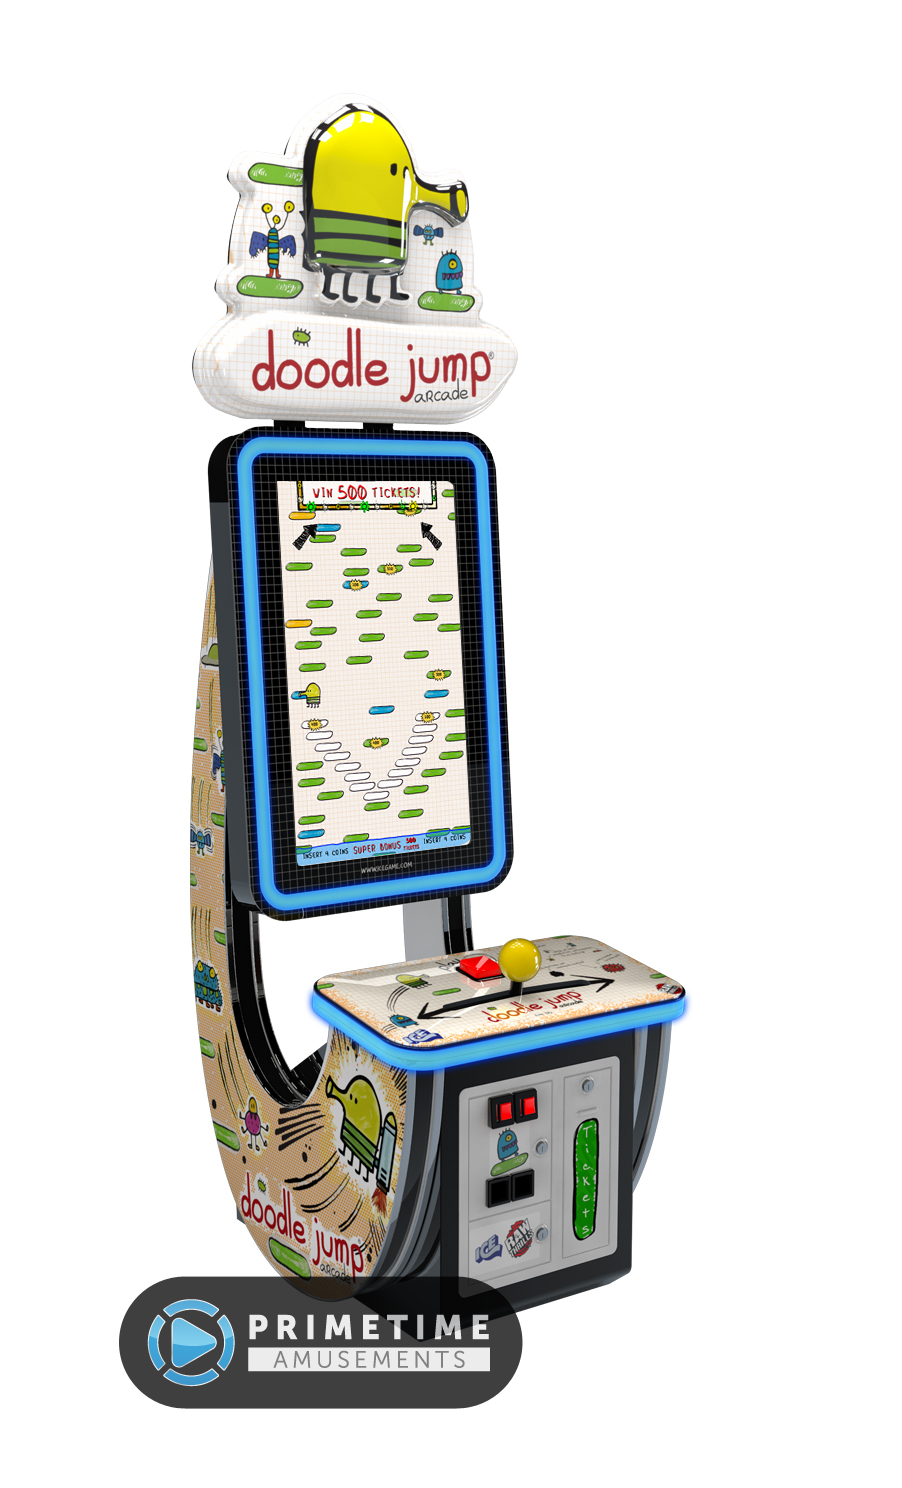 Breaking: Doodle Jump For iPad Arrives